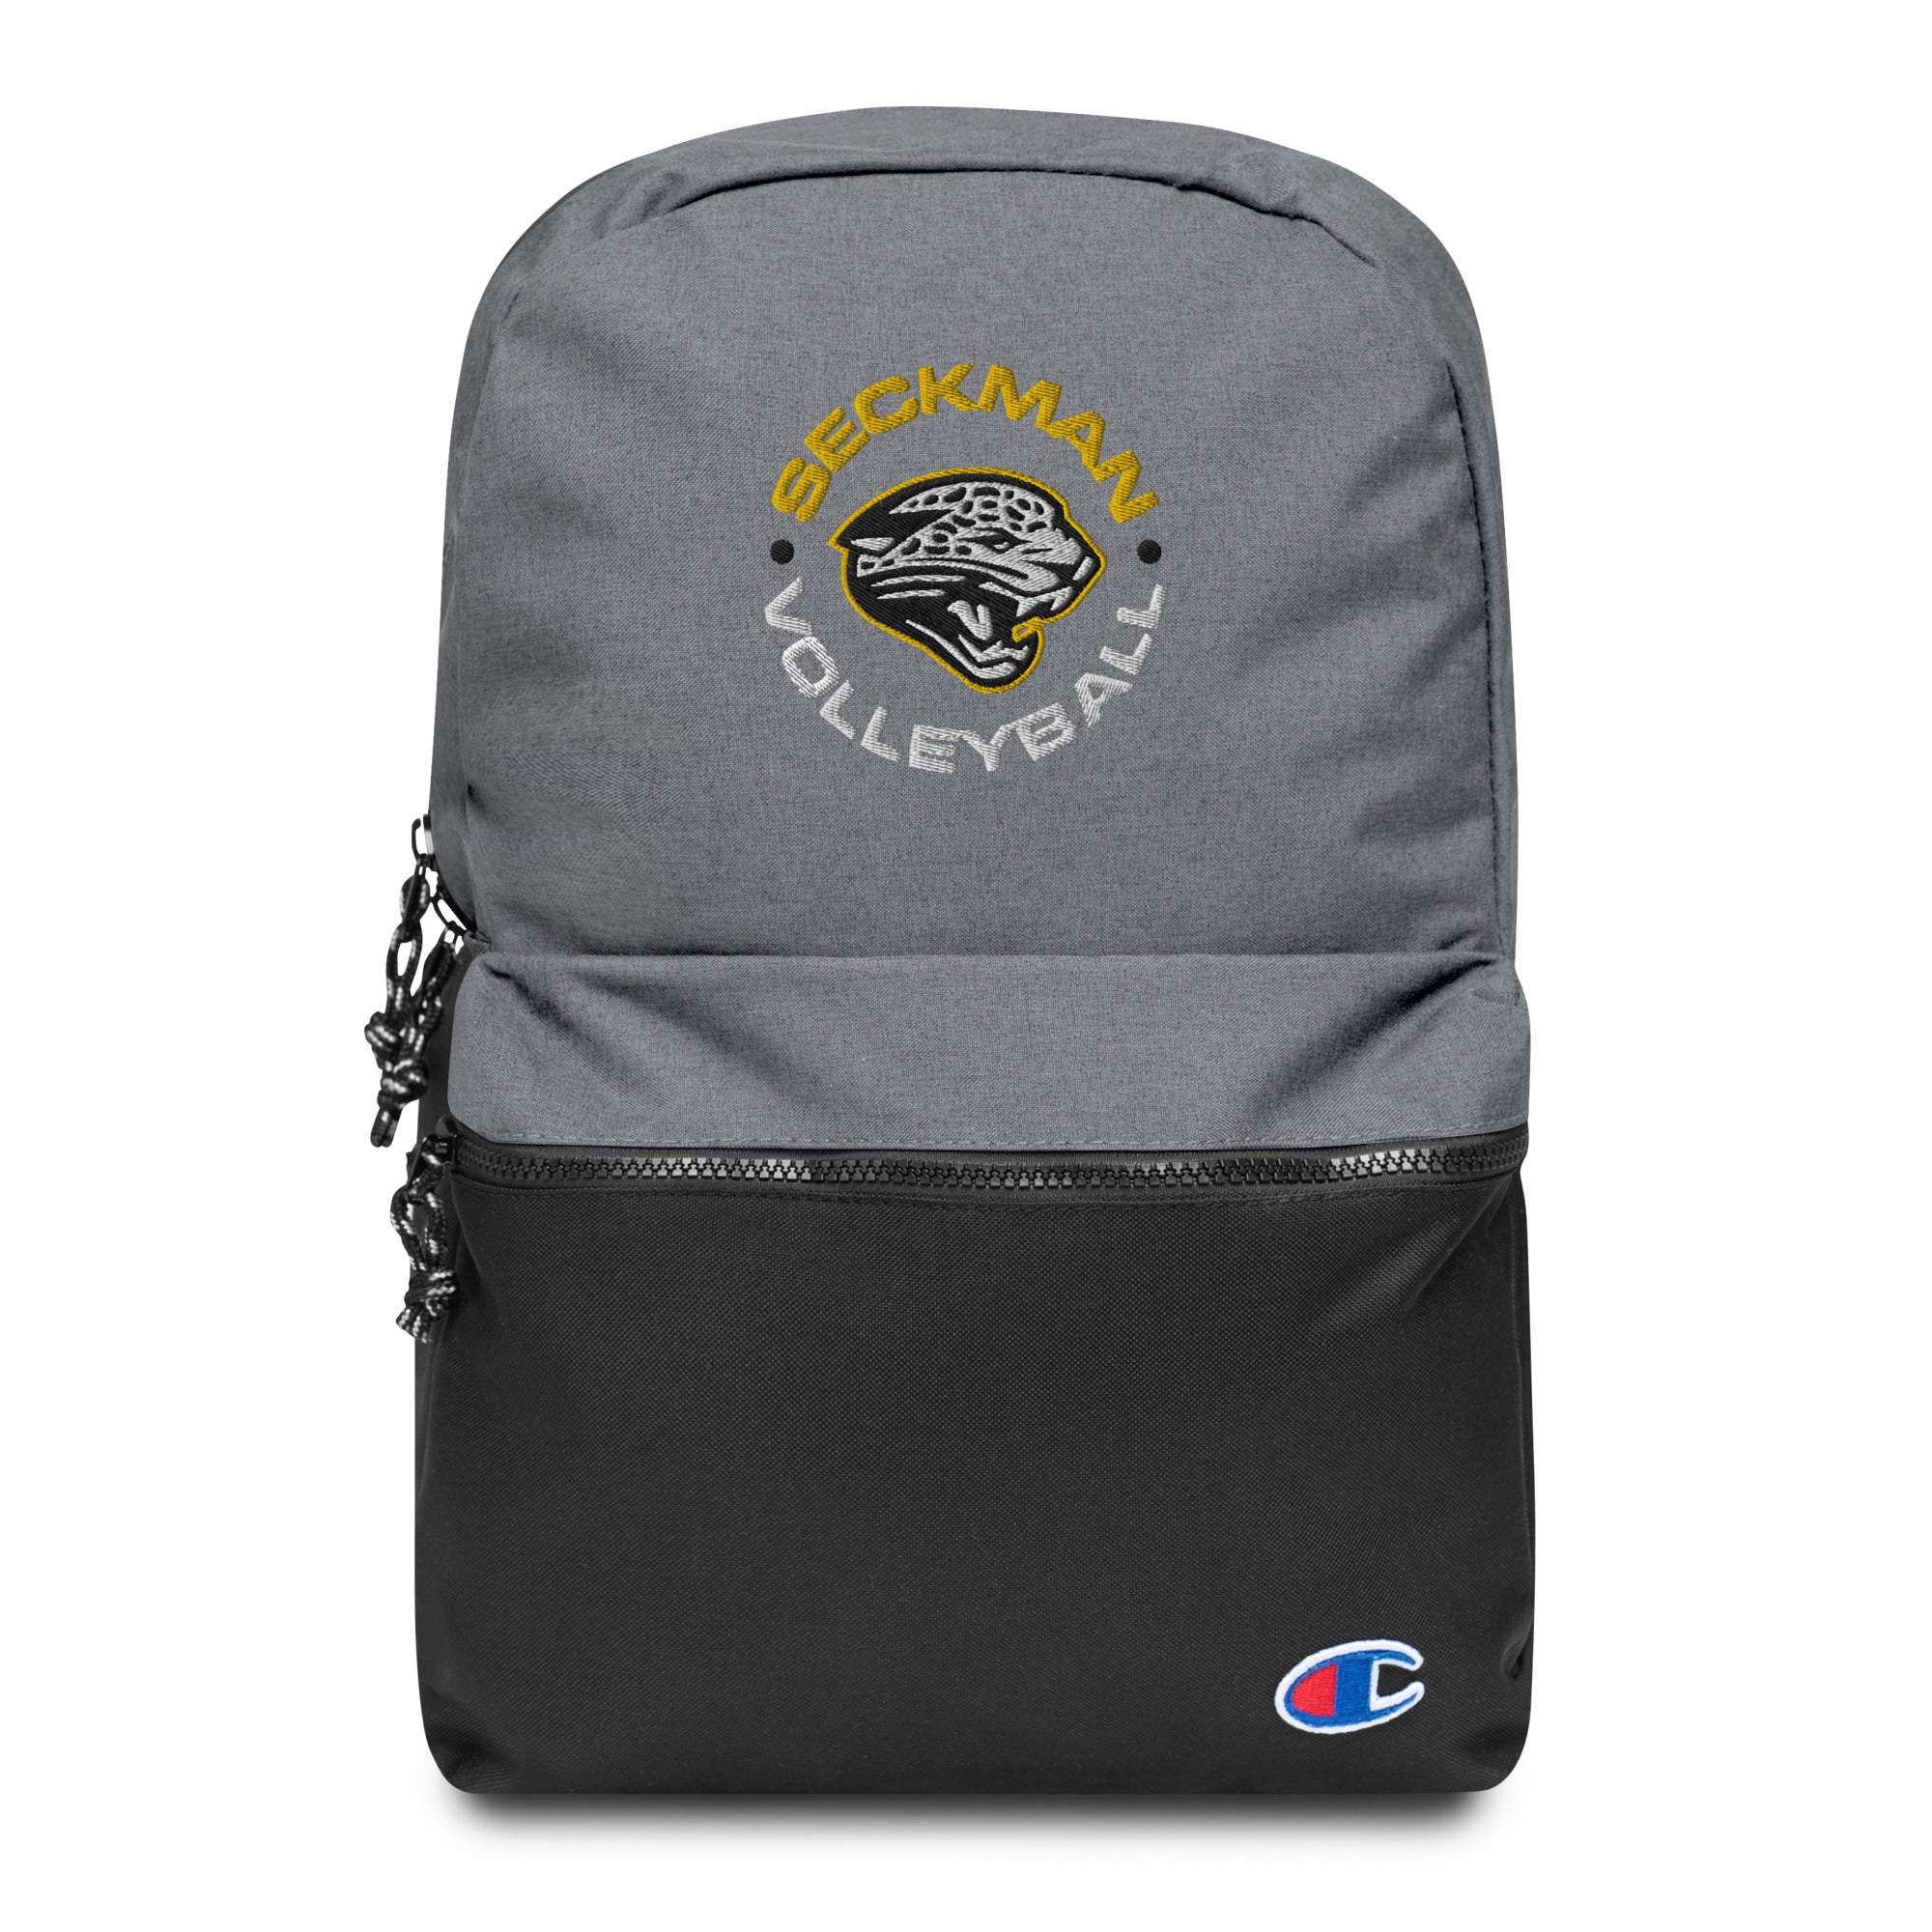 Seckman Volleyball Champion Backpack